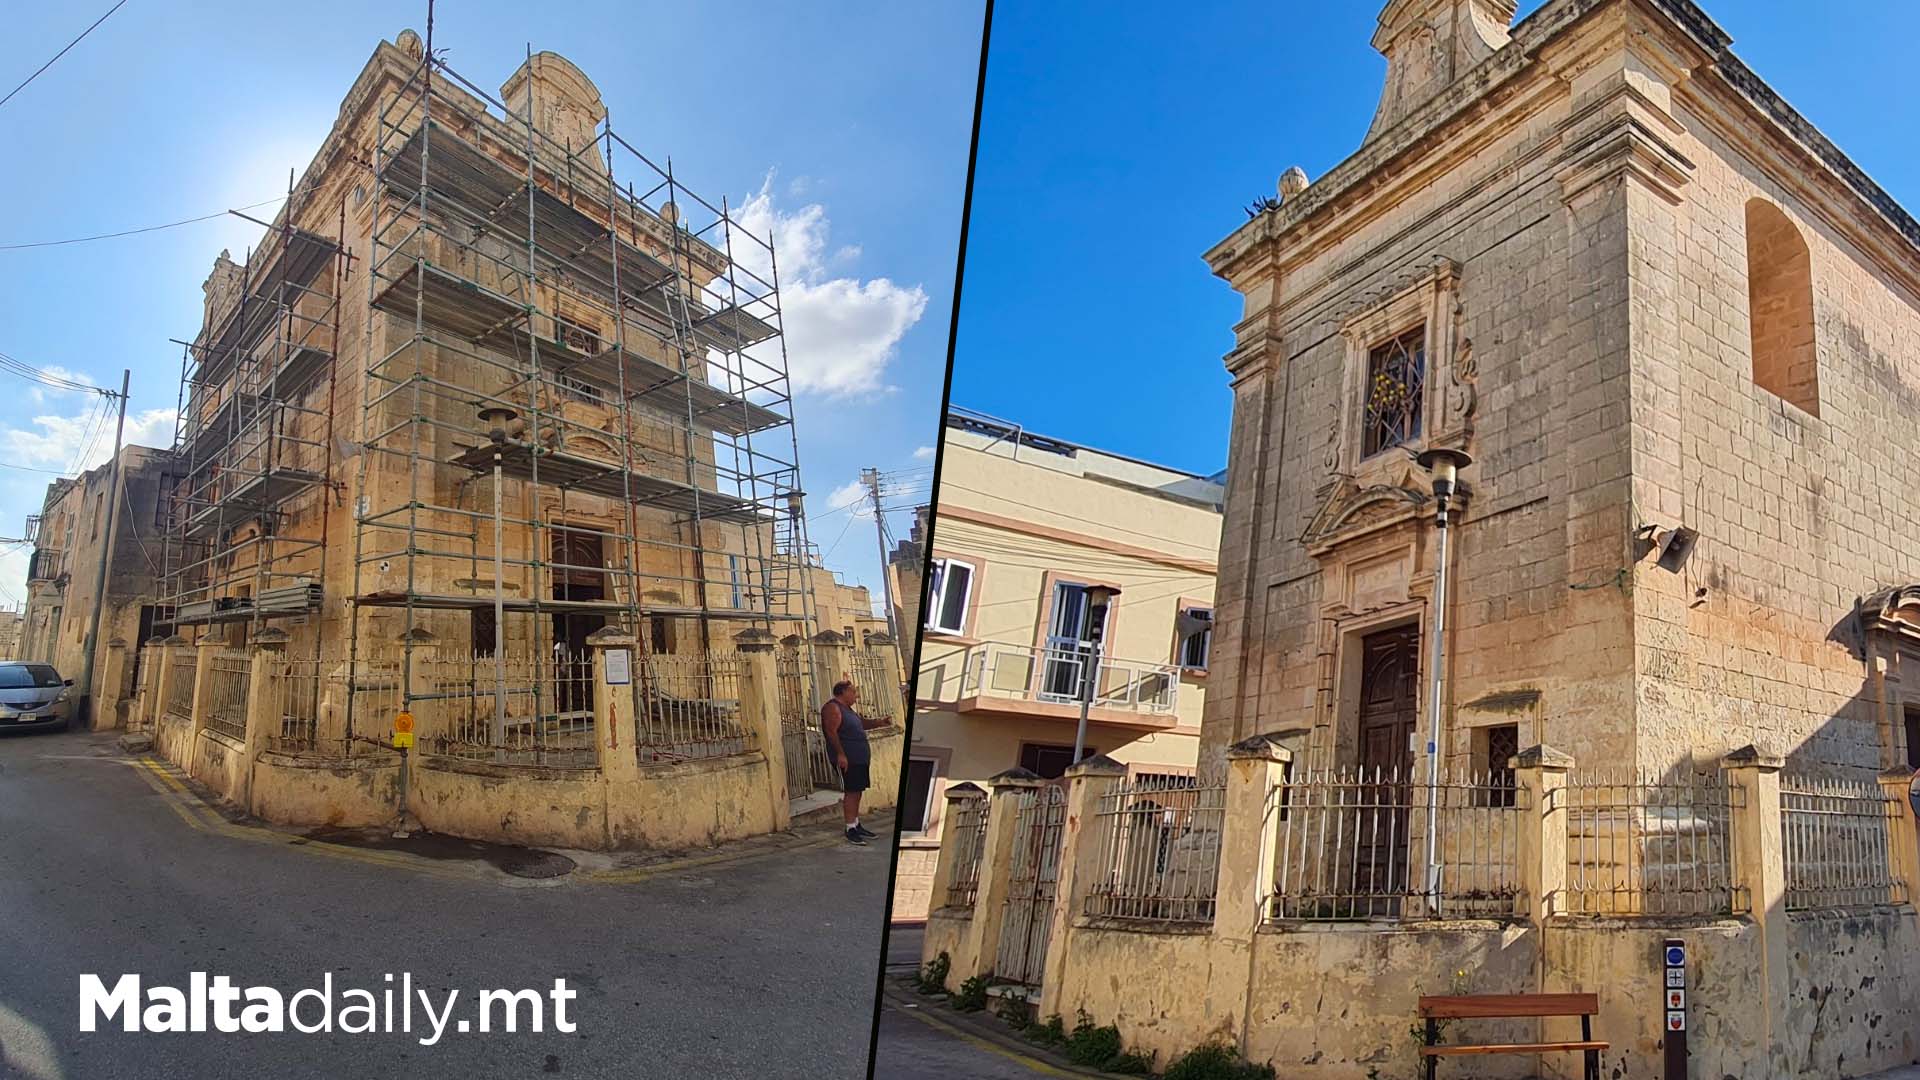 Ongoing Restoration Works On Chapel Of Our Lady Of Light In Ħaż-Żebbuġ